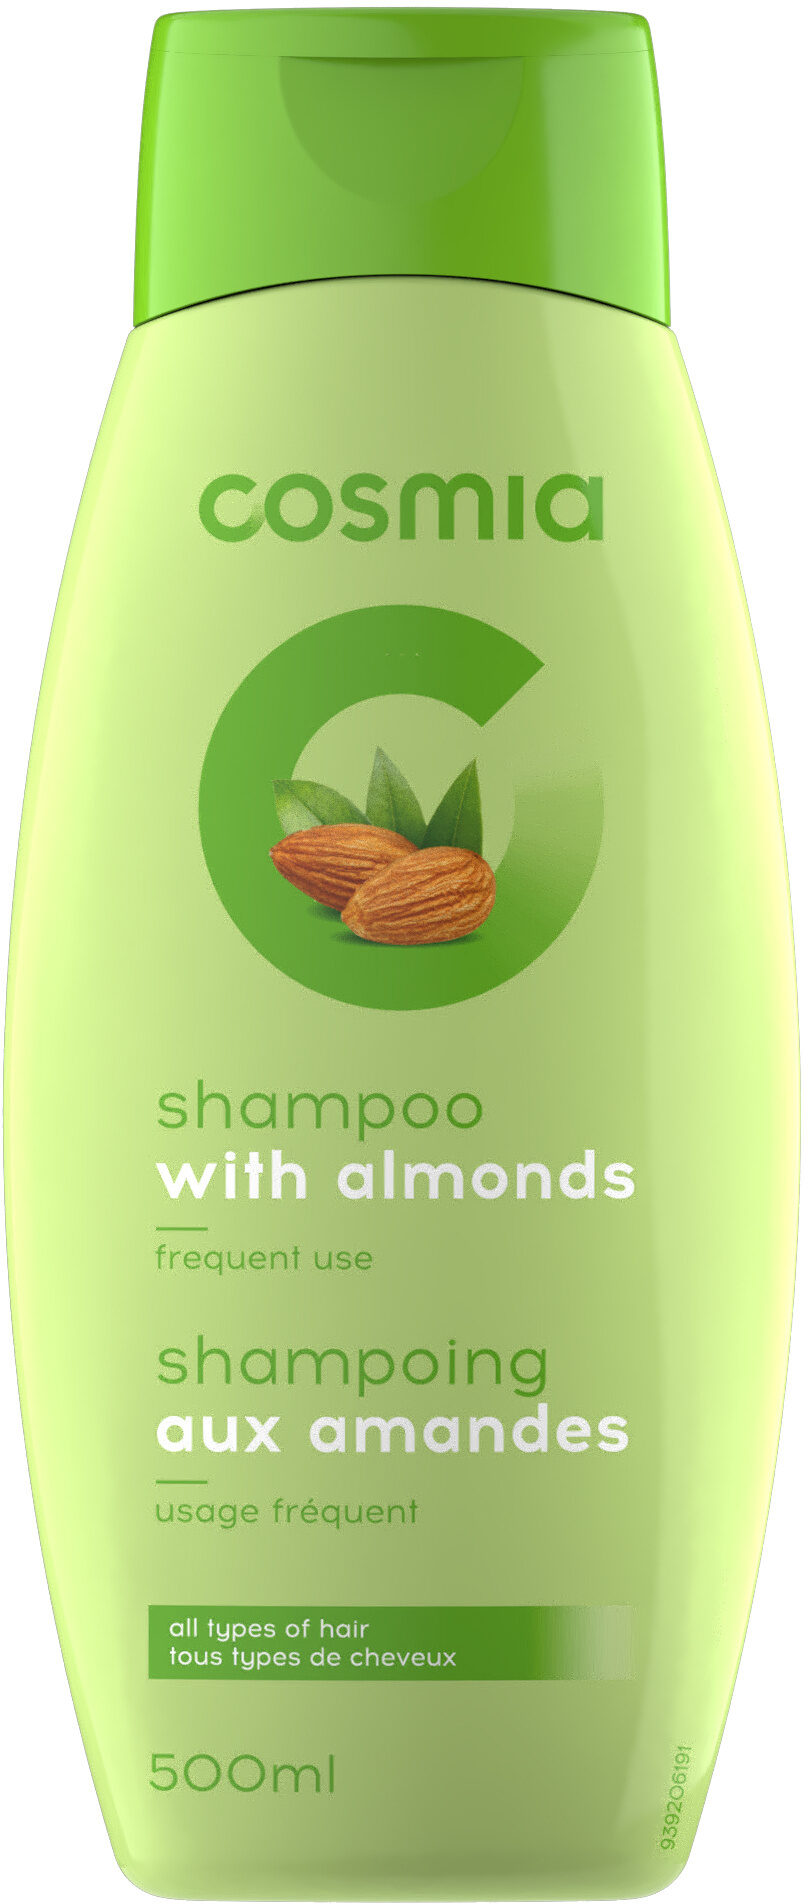 Shampoing aux amandes - Tuote - fr